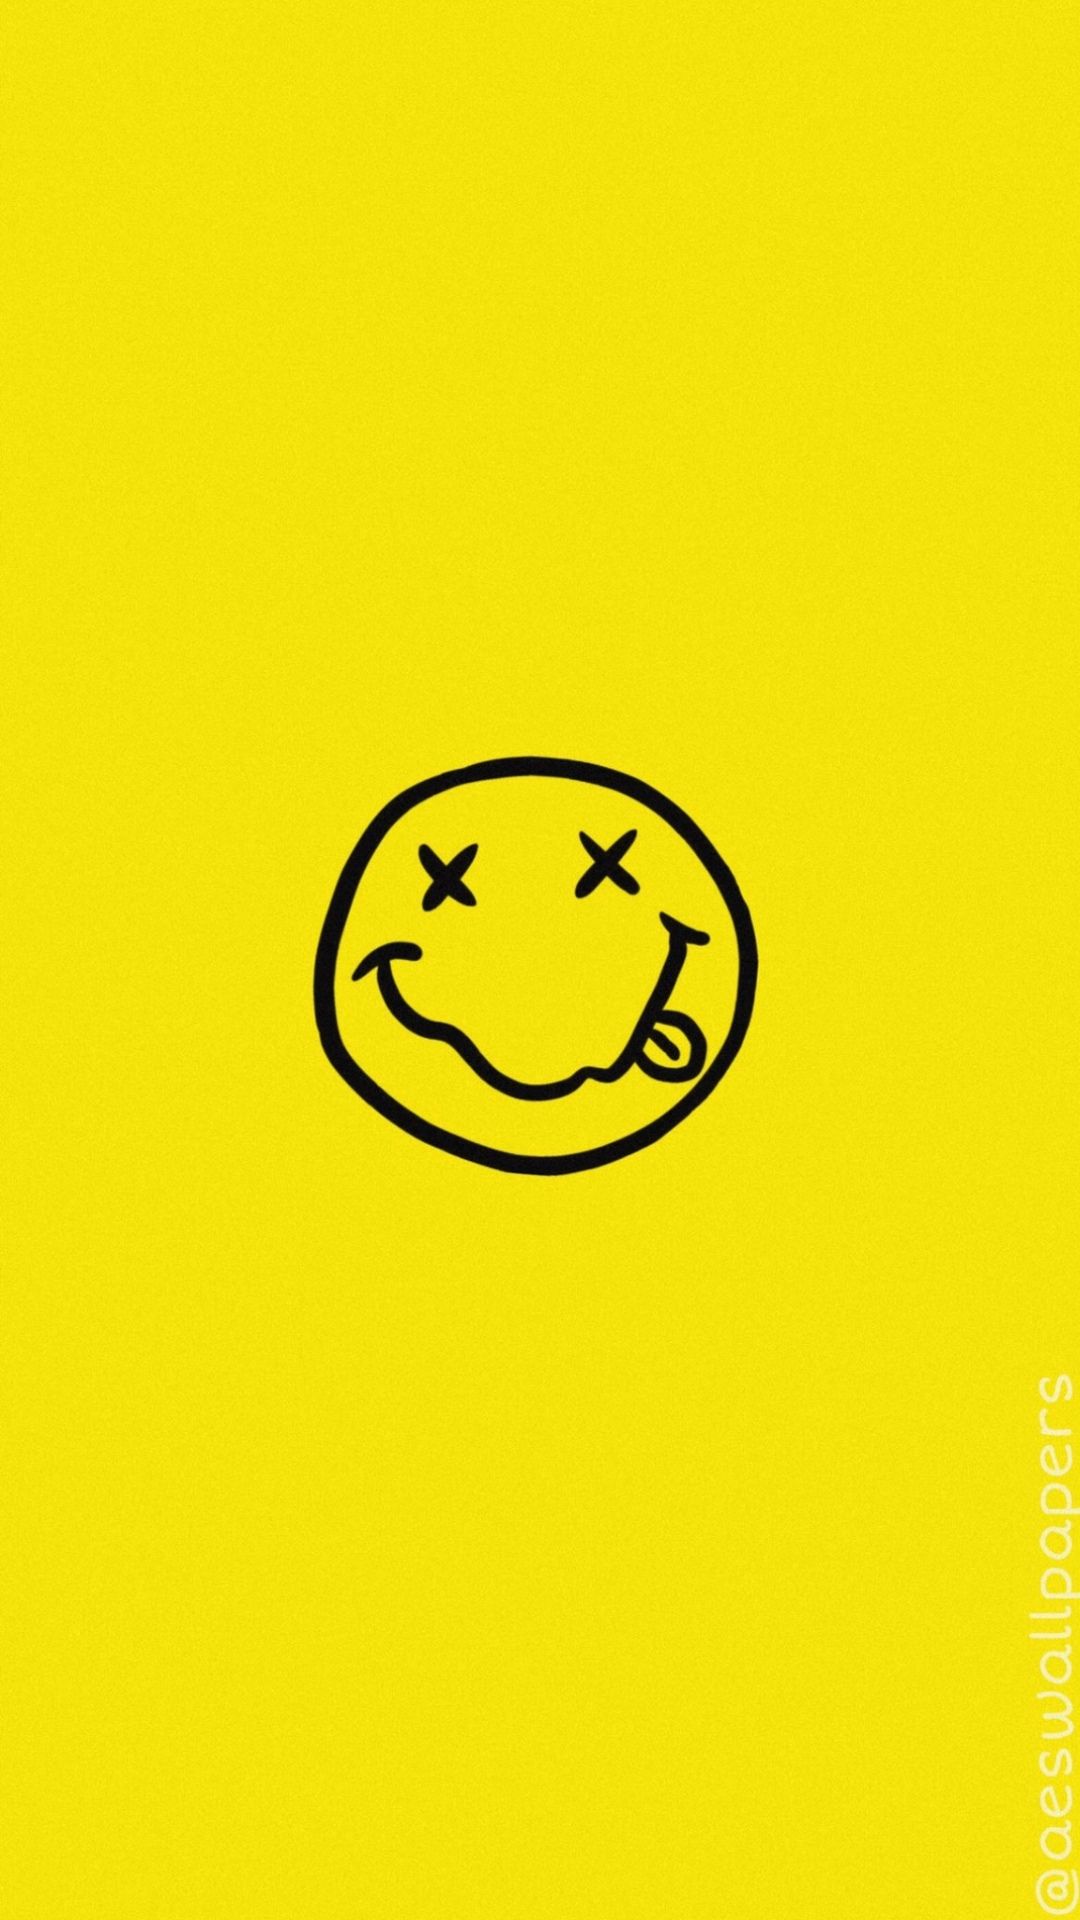 Nirvana iPhone Wallpaper with high-resolution 1080x1920 pixel. You can use this wallpaper for your iPhone 5, 6, 7, 8, X, XS, XR backgrounds, Mobile Screensaver, or iPad Lock Screen - Smiley